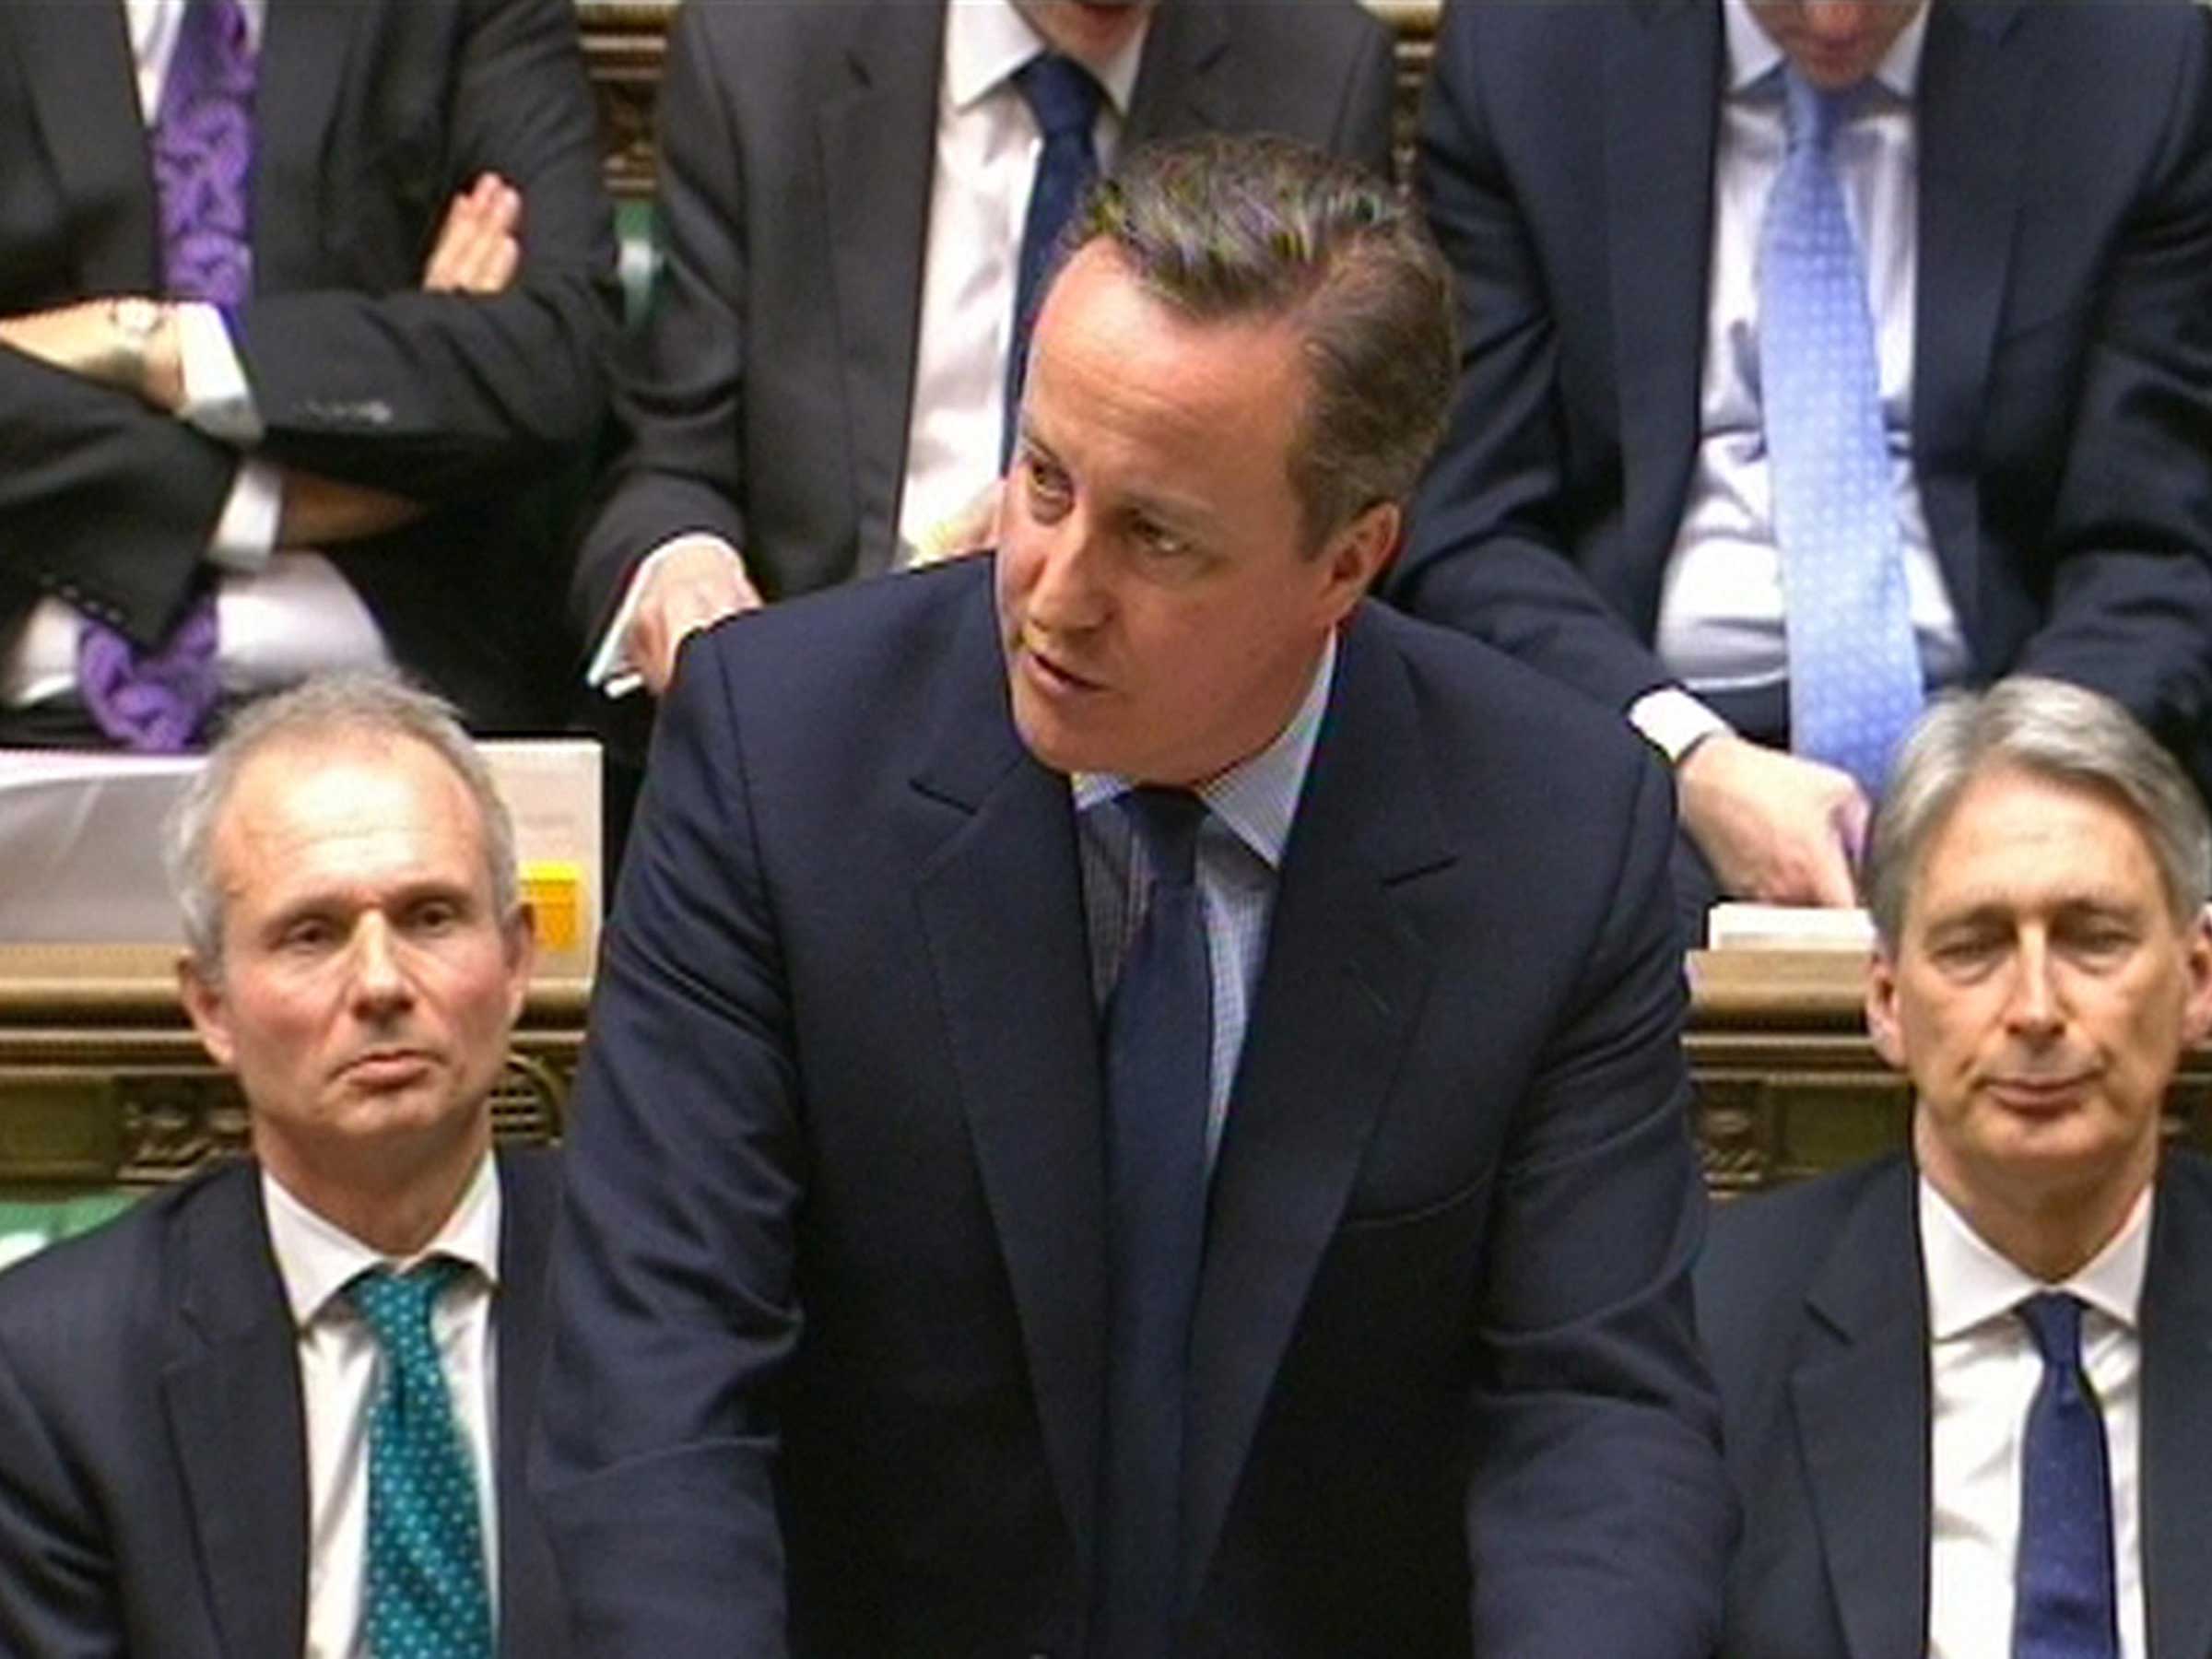 A spokesman for Mr Cameron said he was referring to the imam's support of "an Islamic State"